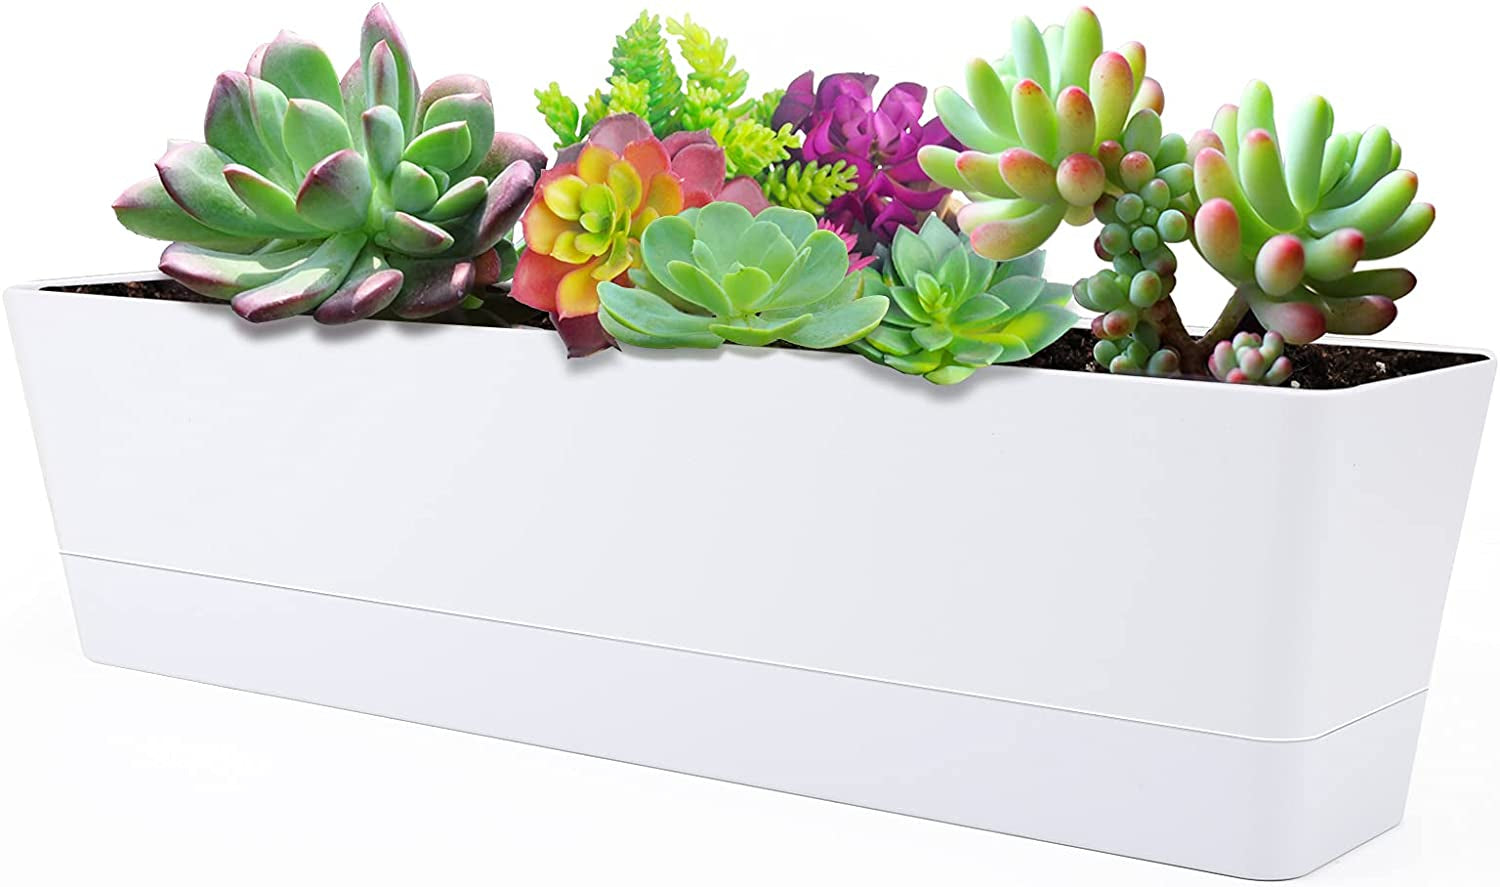 GREANER, Large Window Boxes Planters, Greaner 1PCS 16X3.8 Inch White Vegetable Herb Flower Boxes with Tray, Indoor Succulent Cactus Plastic Rectangle Pot for Balcony, Office, Garden, Outdoor, Windowsill Decor